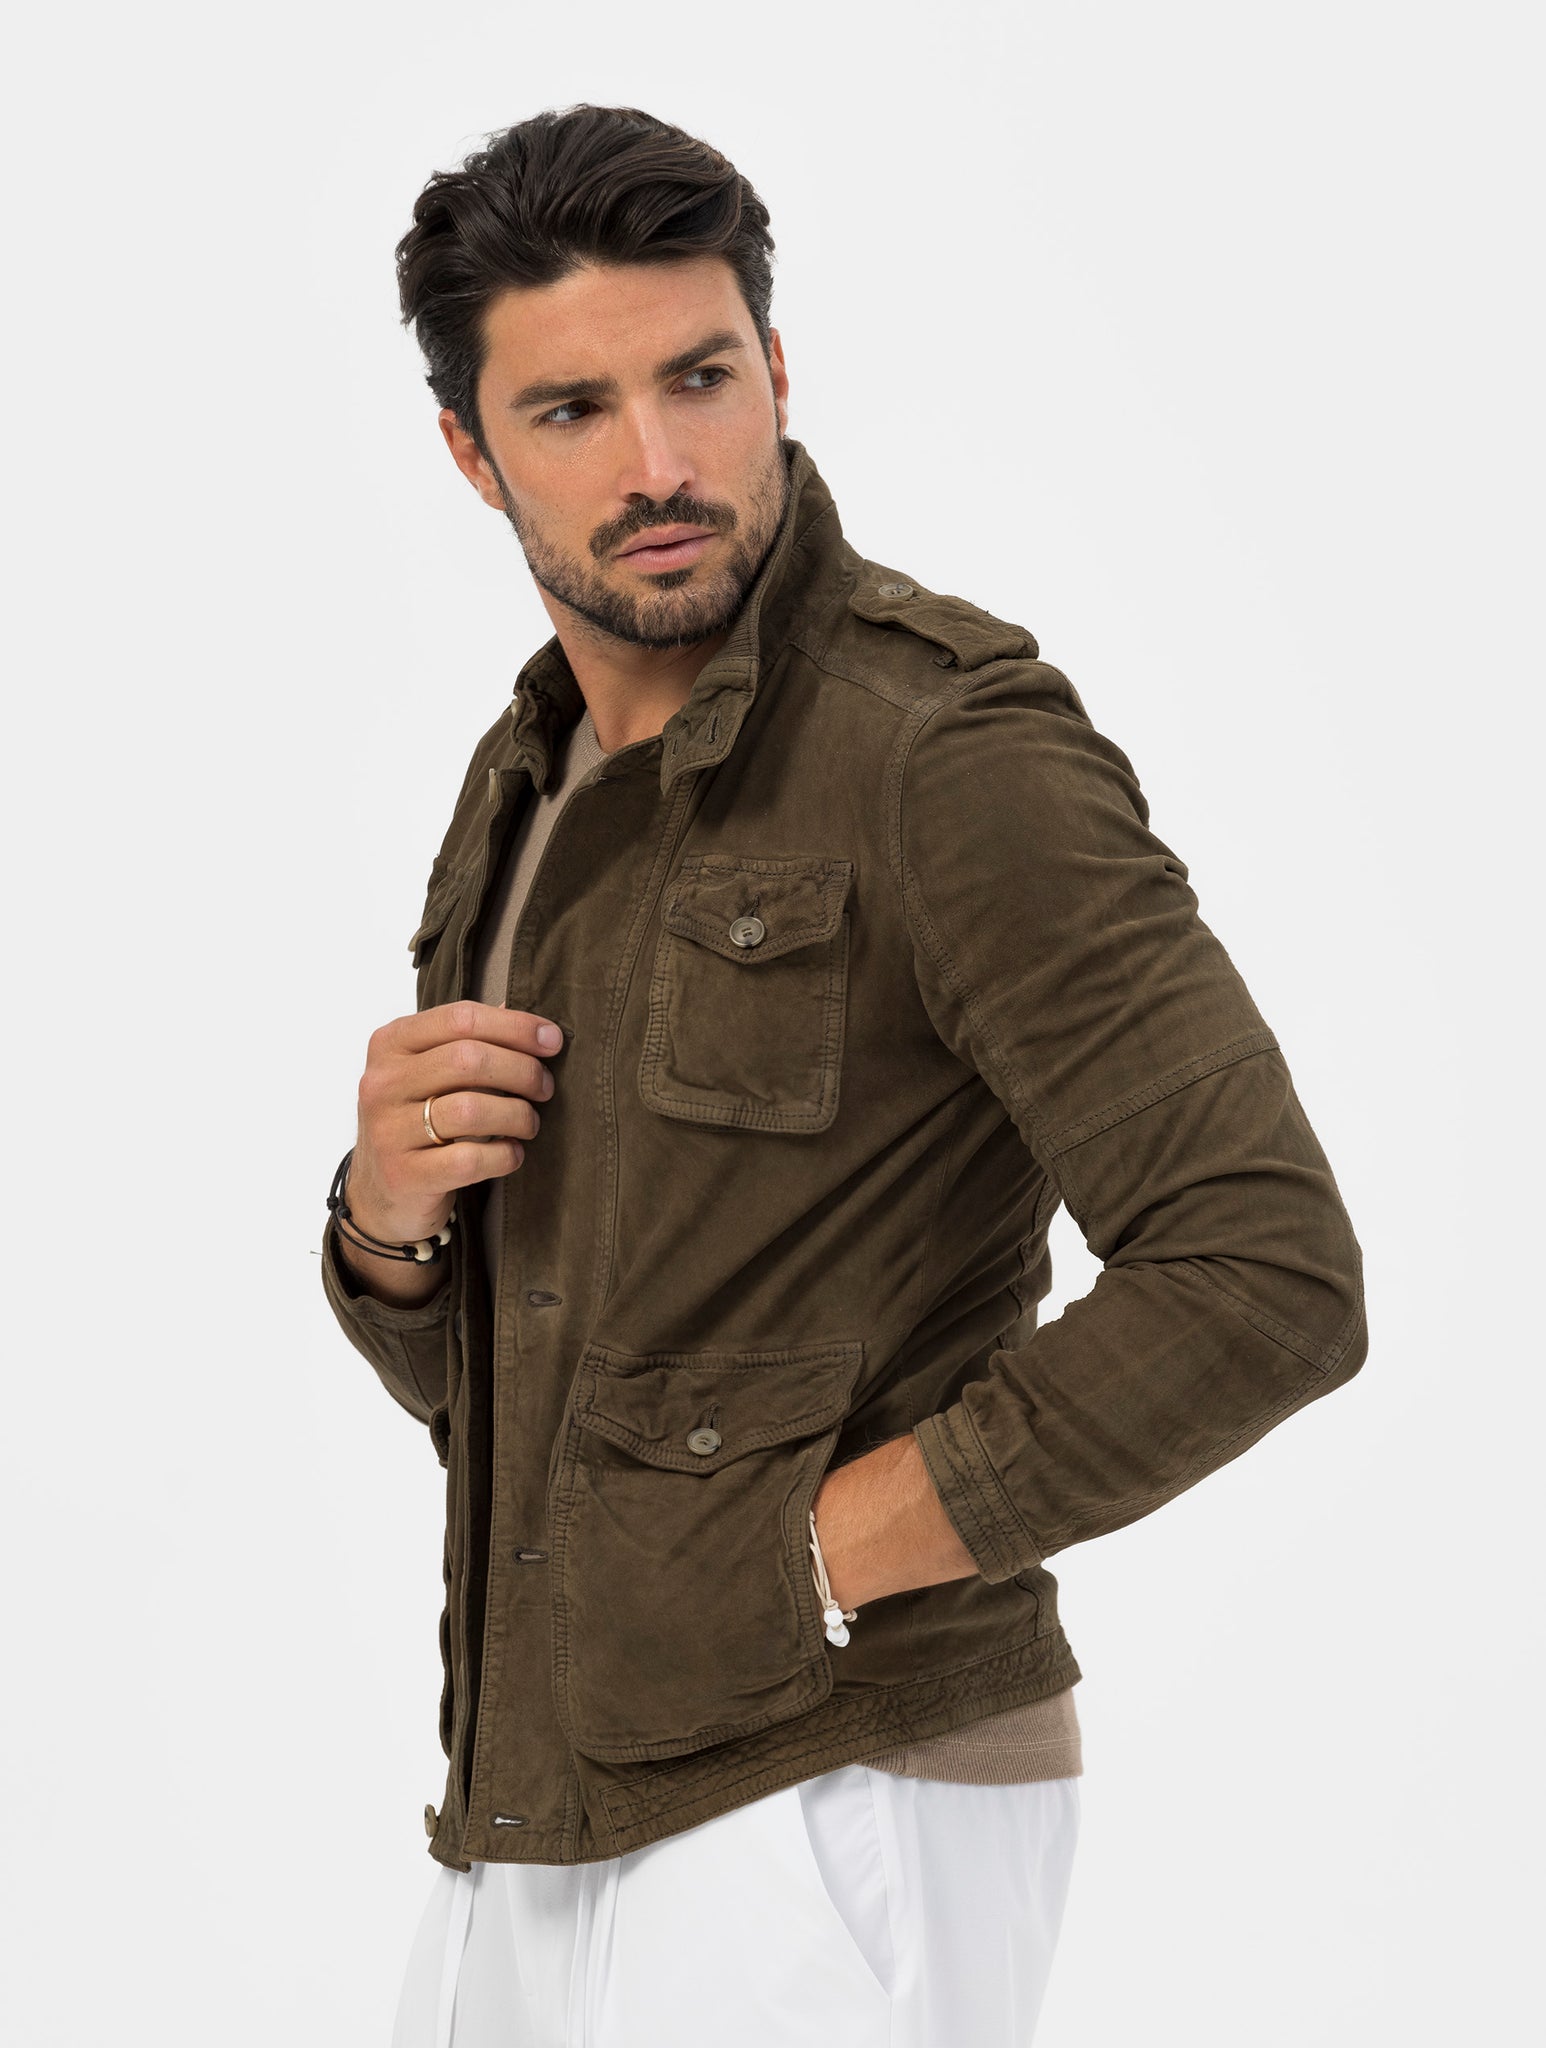 INDIAN SCOUT LEATHER JACKET IN MILITARY GREEN